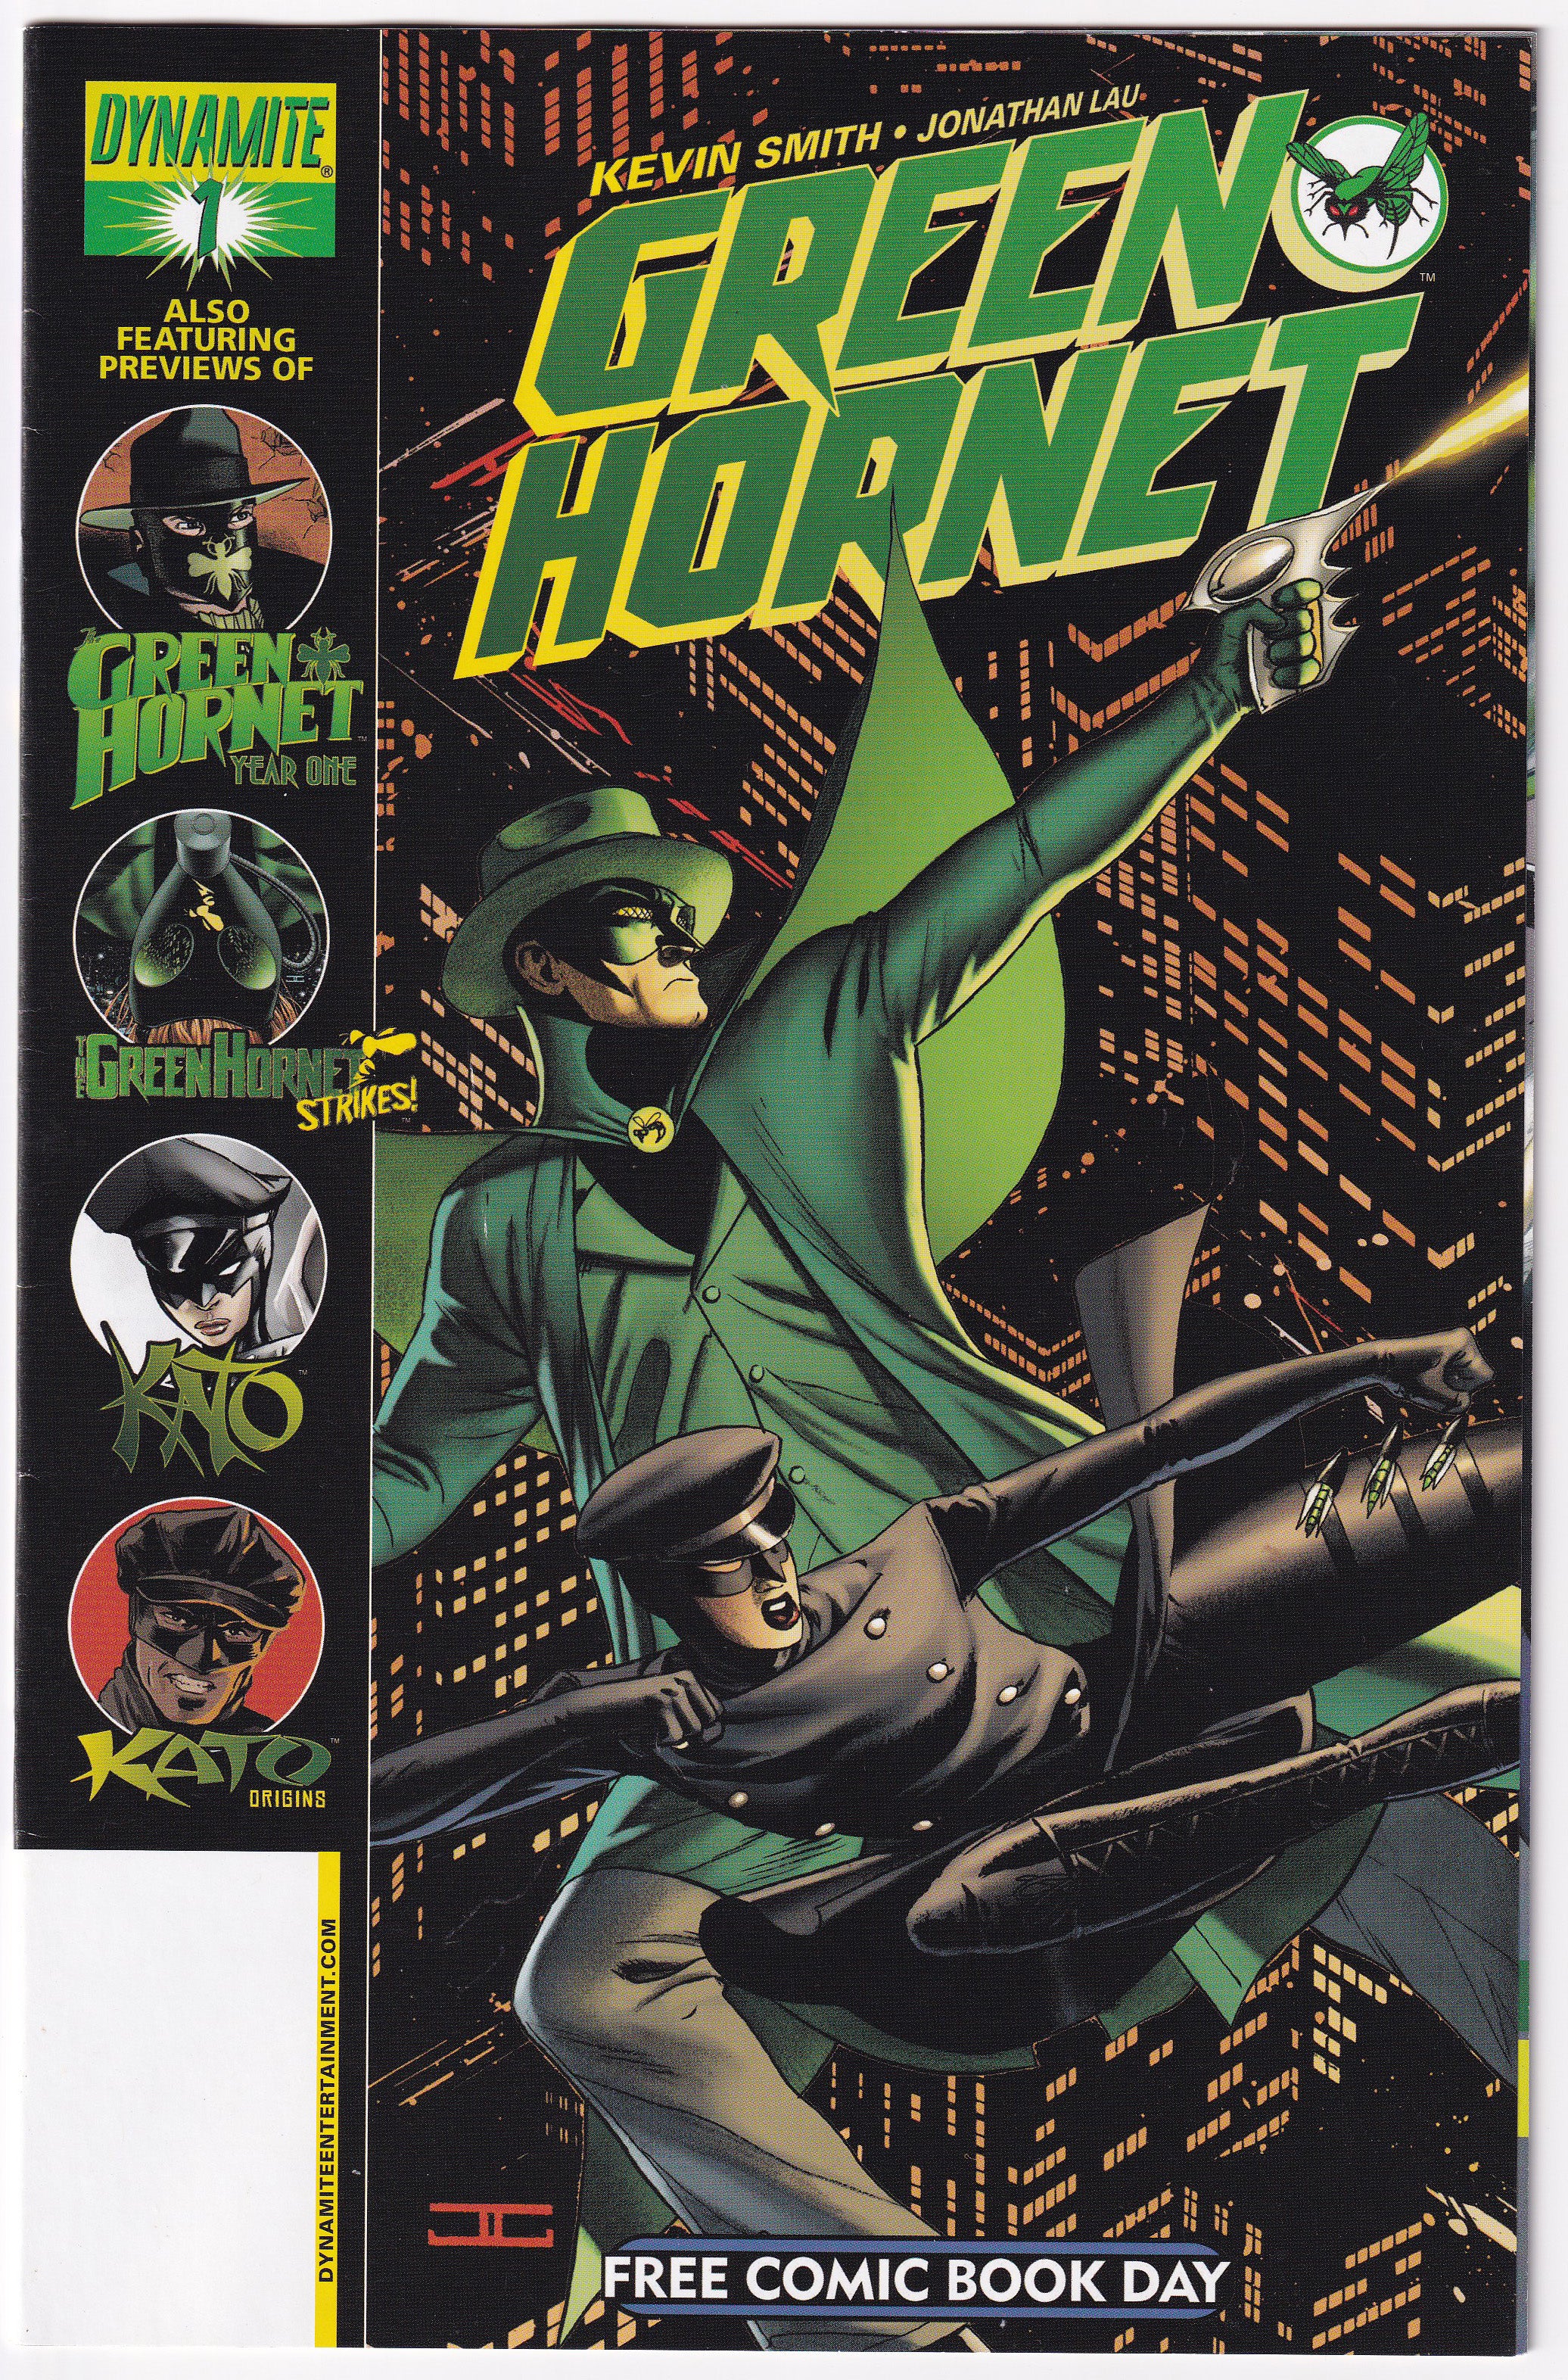 Photo of FCBD 2010 (Green Hornet) Iss 1 Very Fine/Near Mint comic sold by Stronghold Collectibles